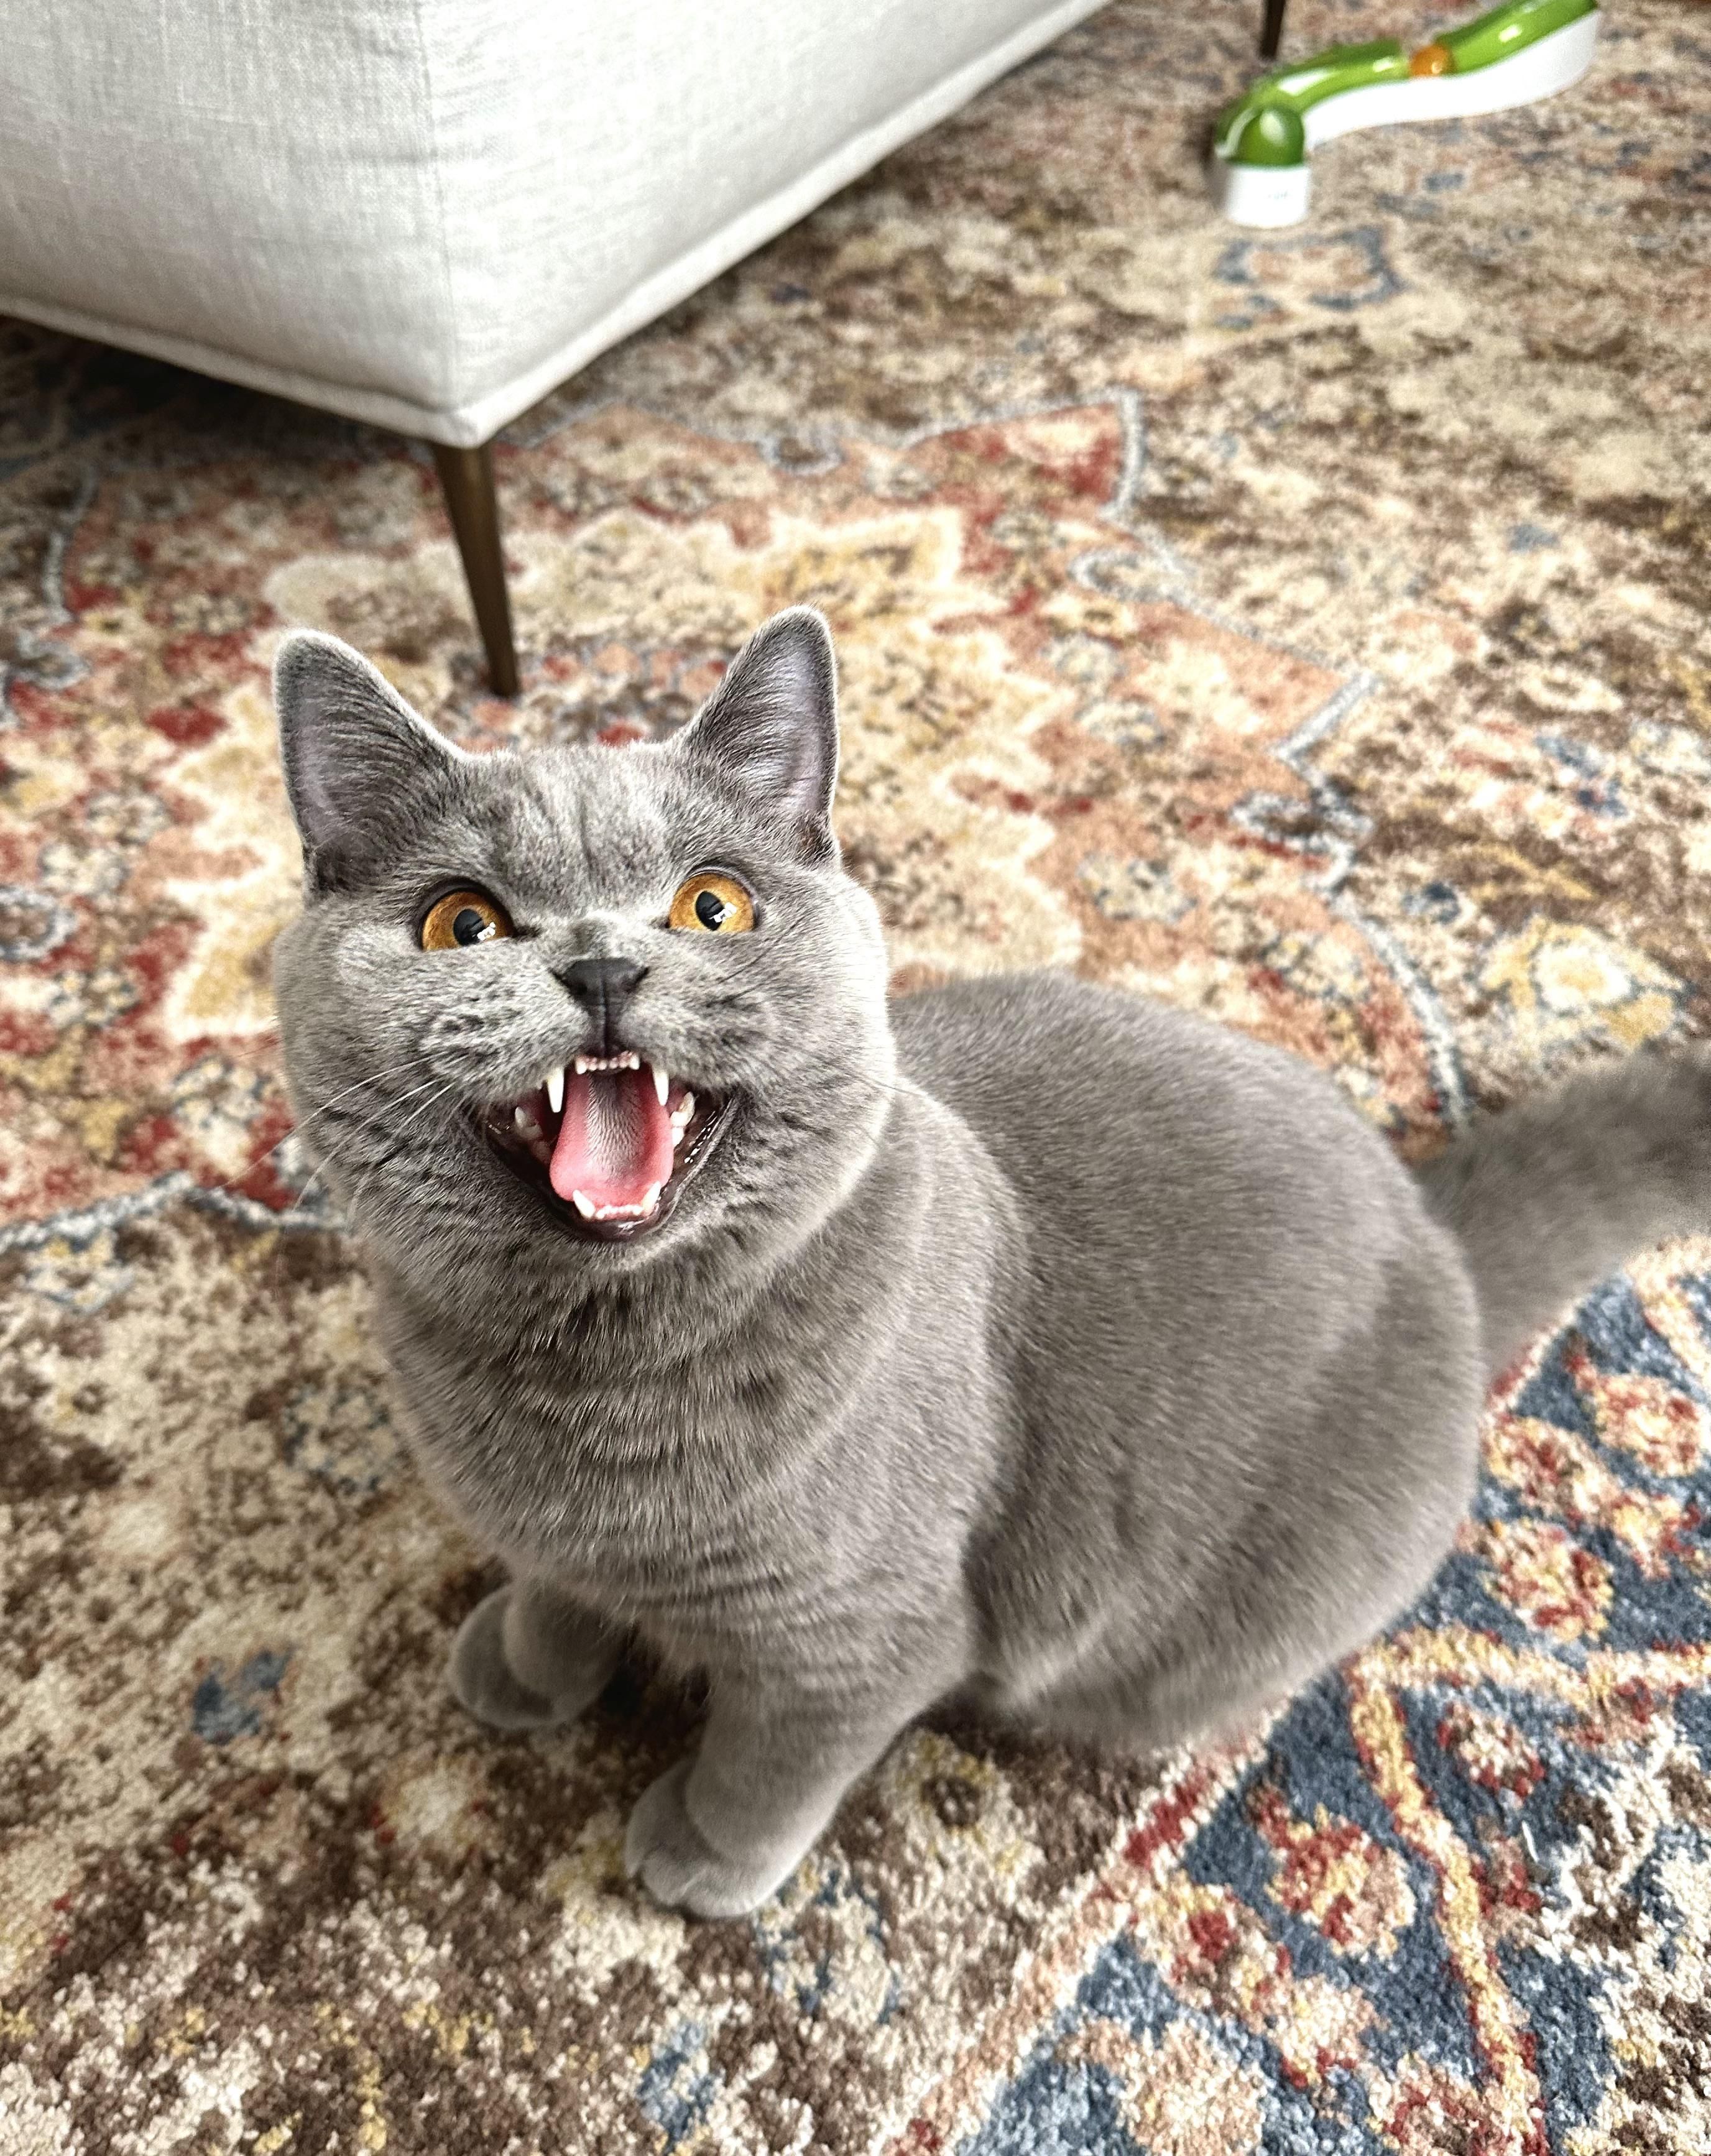 For some reason this is the face my cat makes when he’s having fun